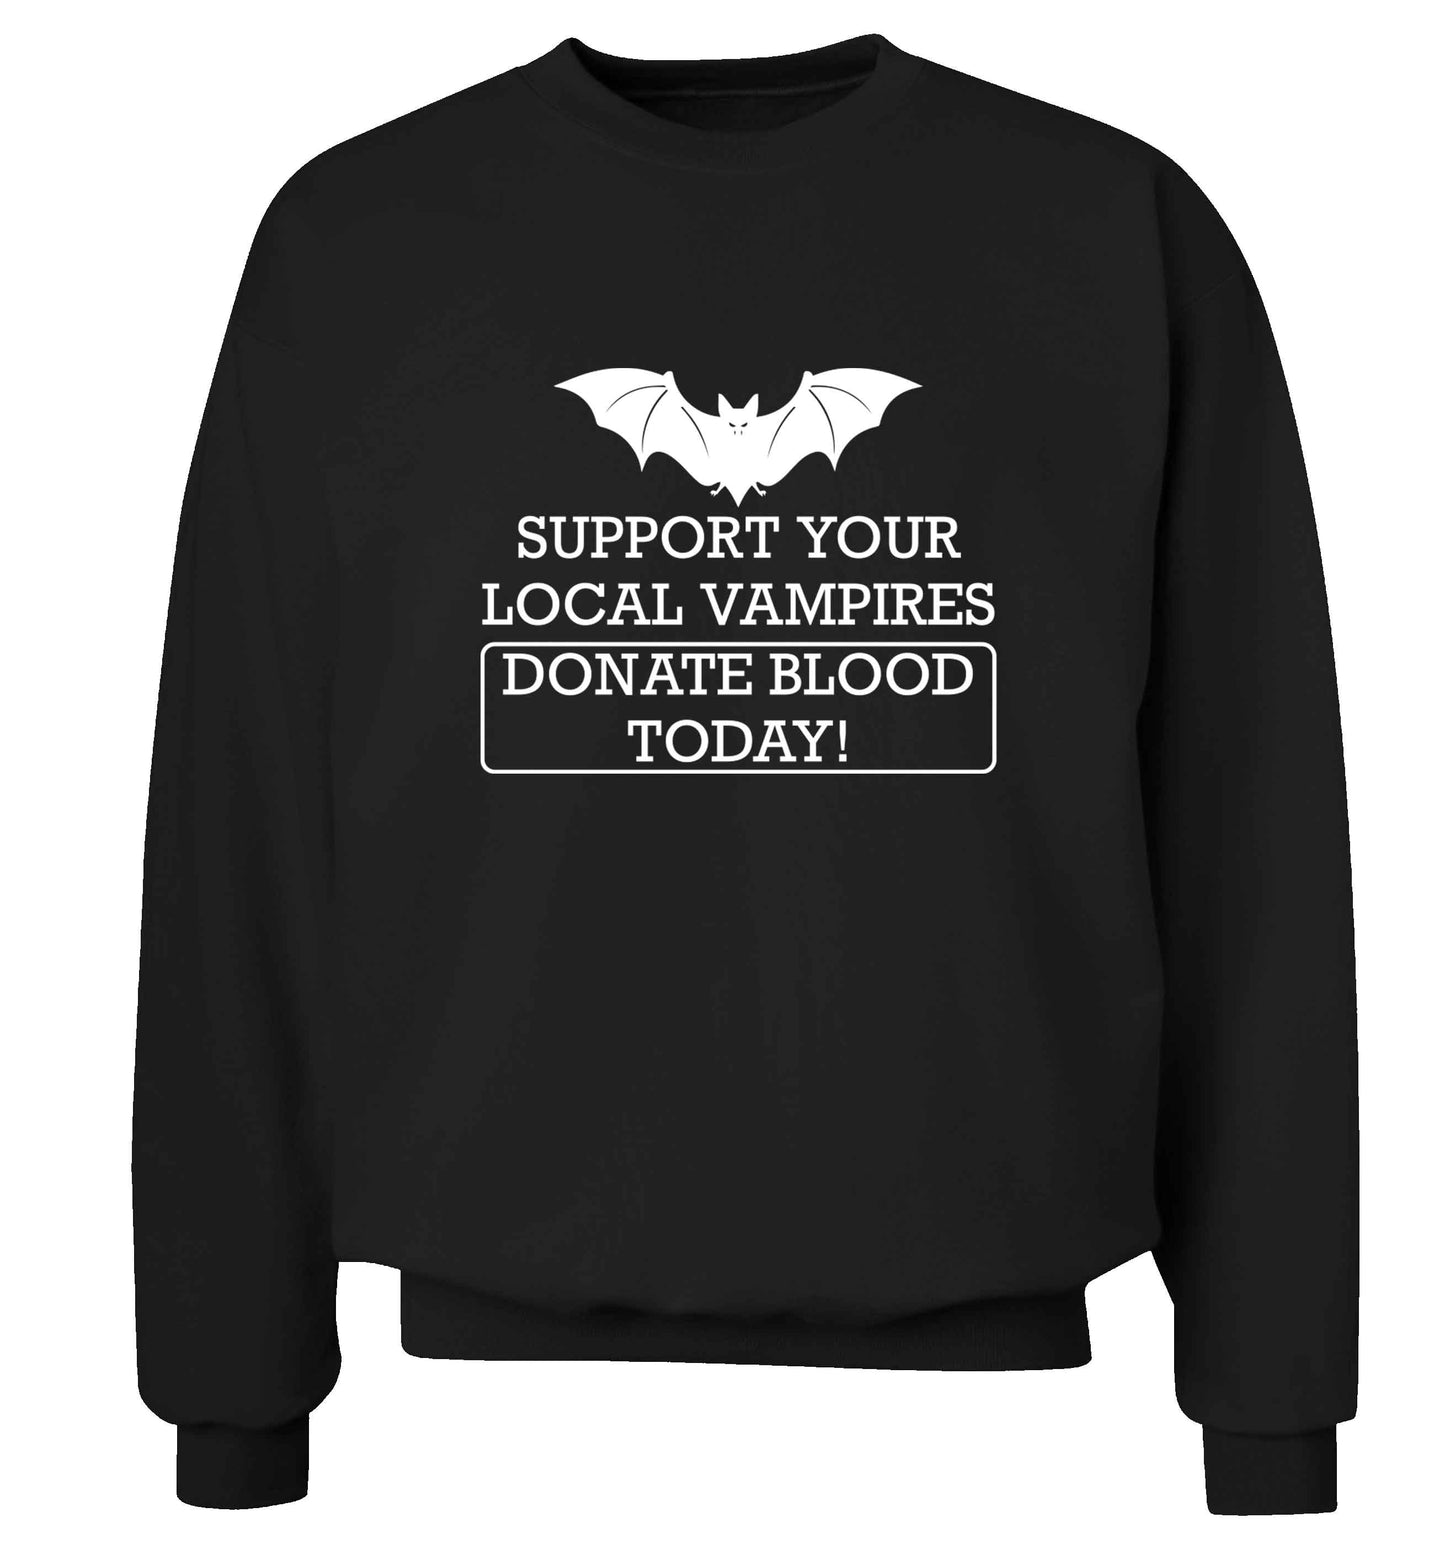 Support your local vampires donate blood today! adult's unisex black sweater 2XL